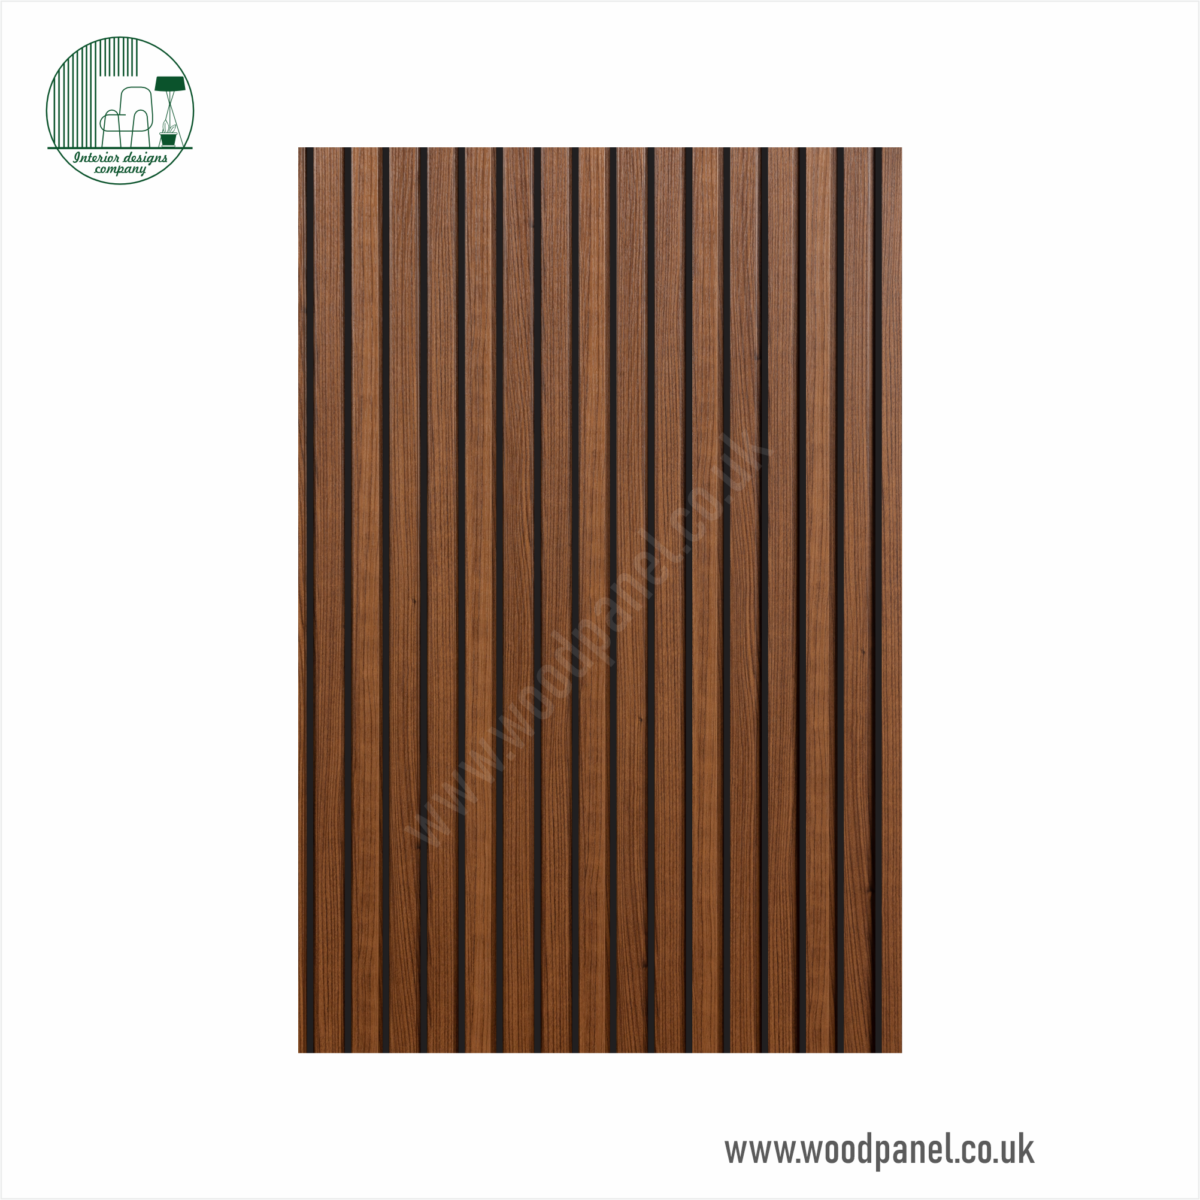 H3734 BLK 120 03 Purity Wood Panel - Natural Dijon Walnut with Black Strip